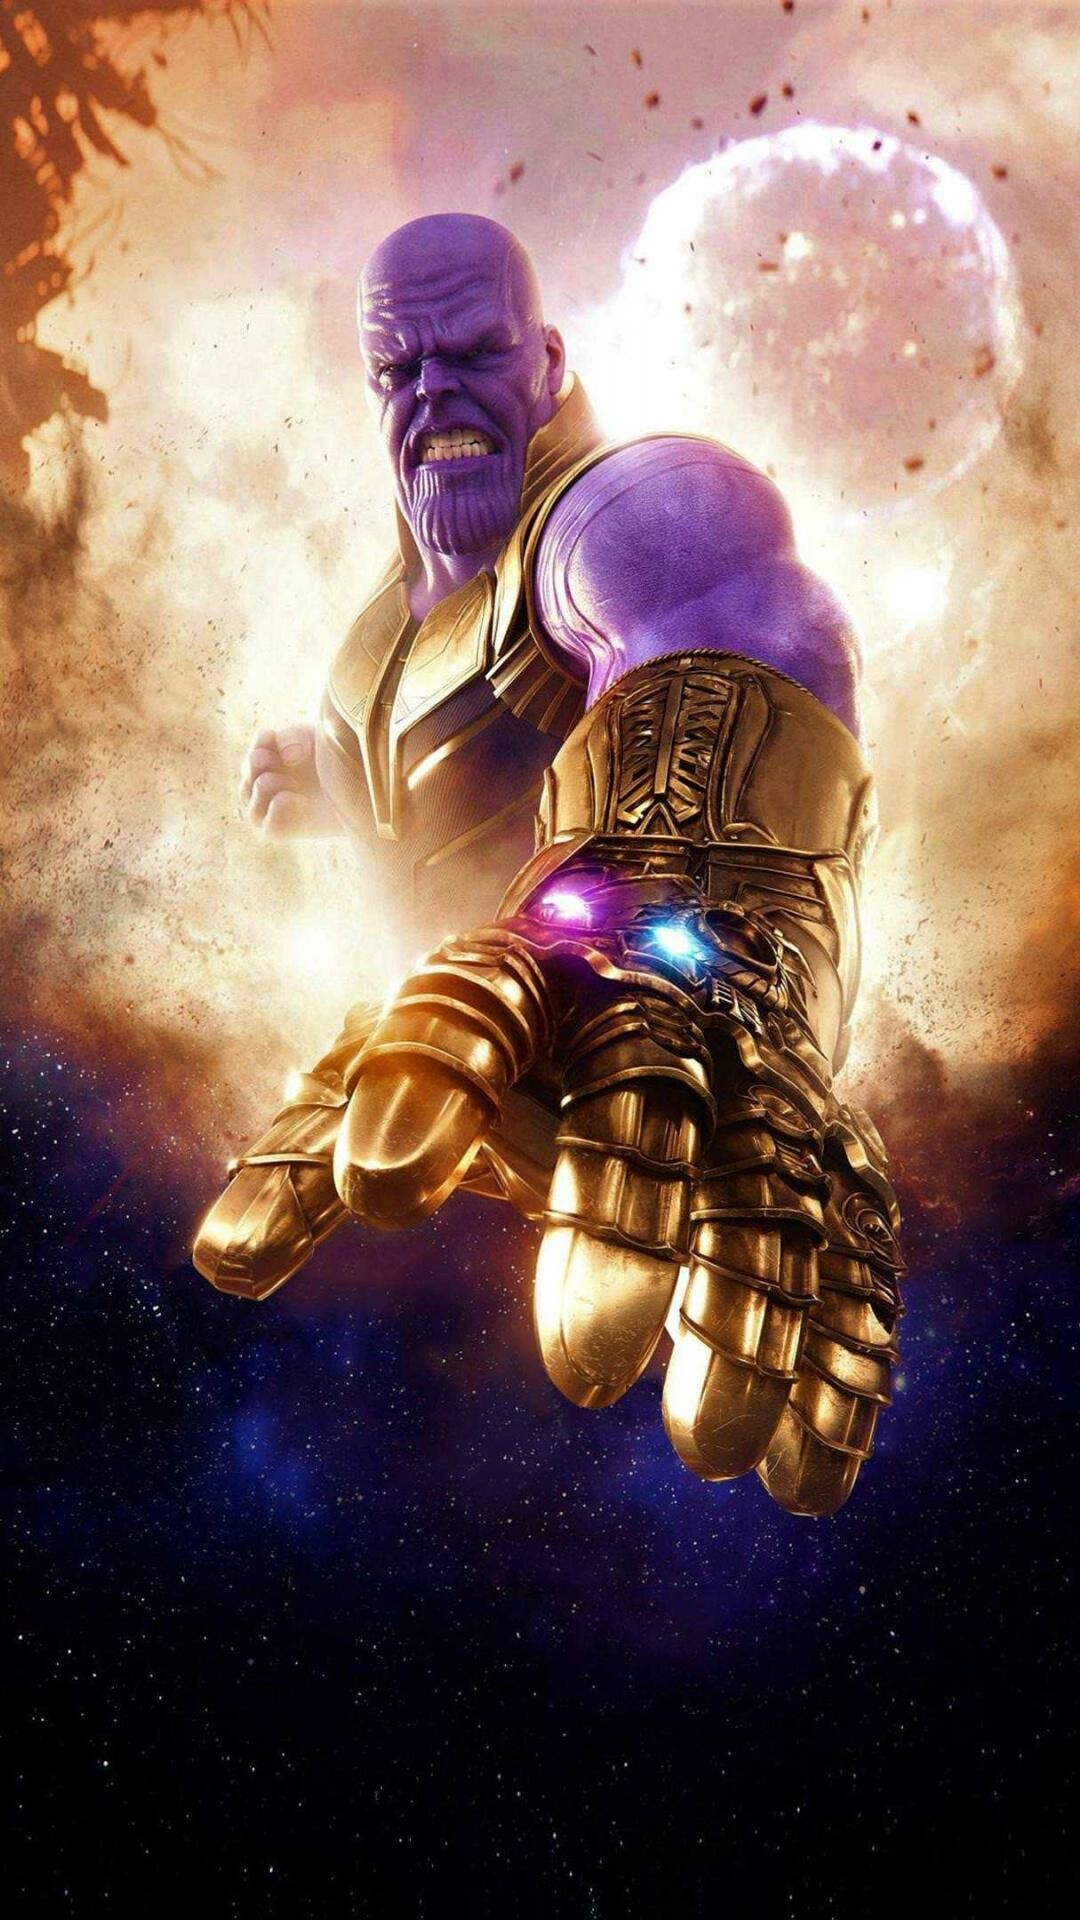 Marvel Villain: Thanos, A fictional character portrayed primarily by Josh Brolin, Avengers. 1080x1920 Full HD Wallpaper.